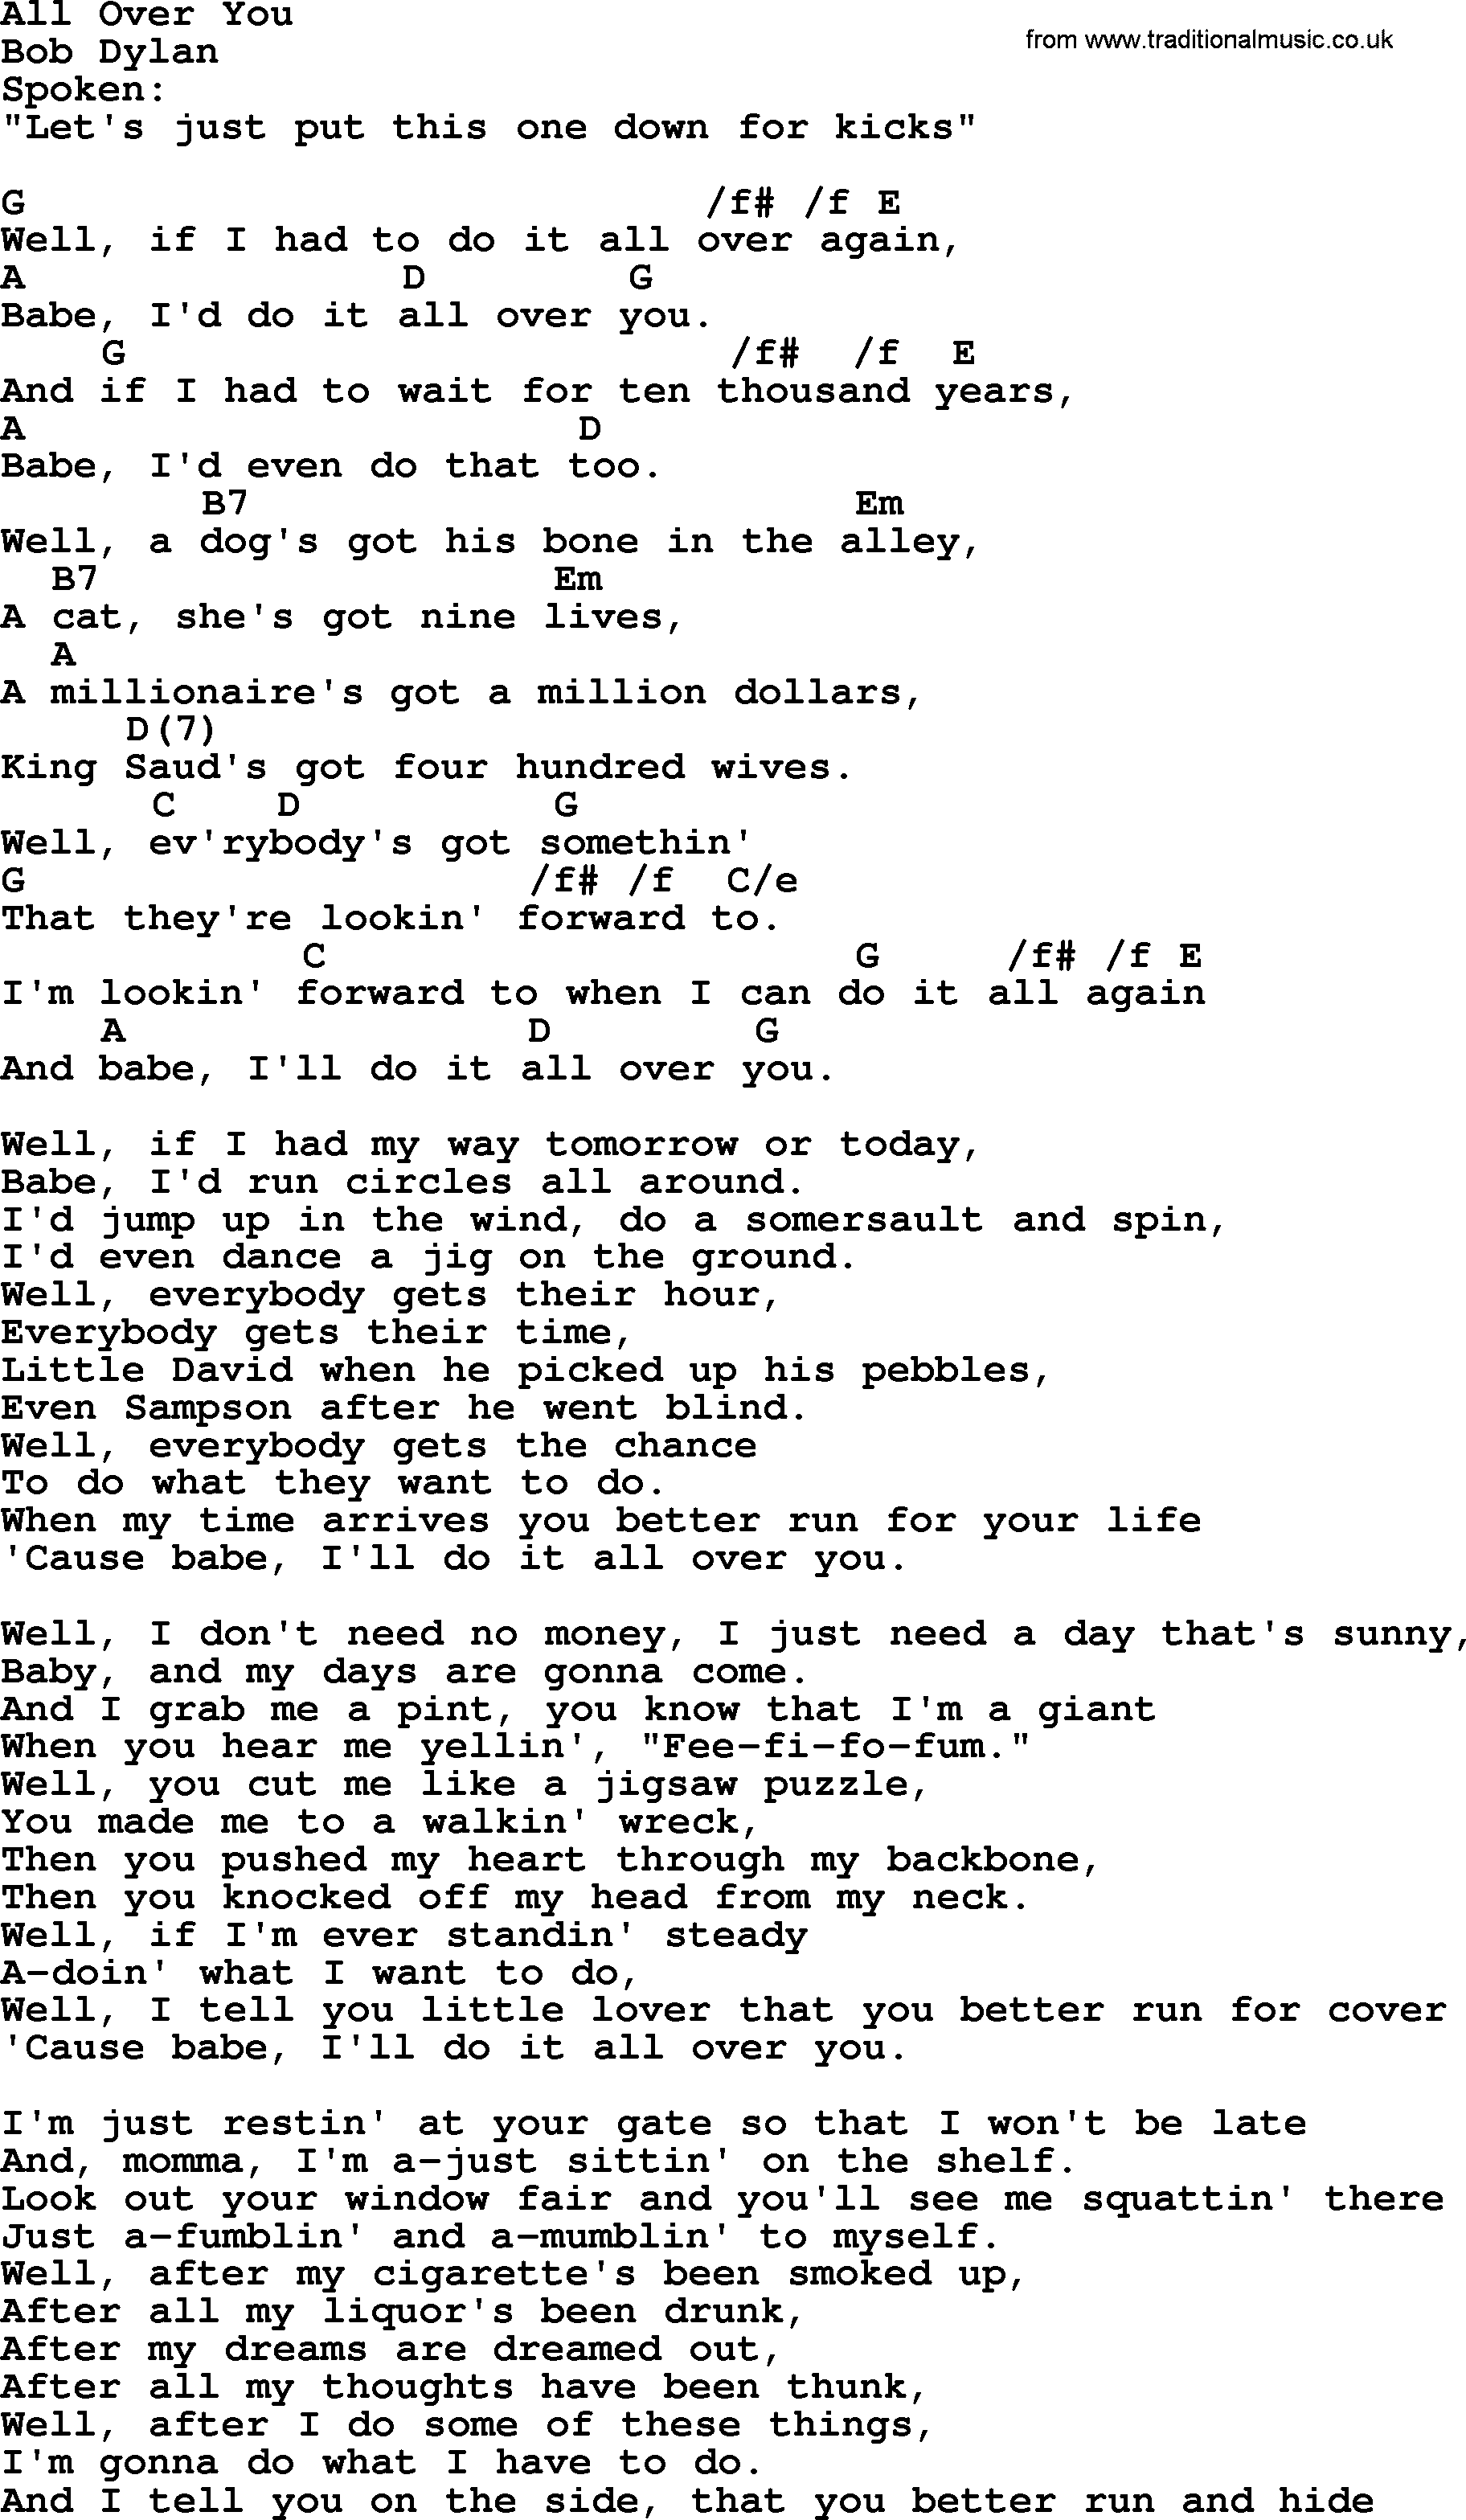 Bob Dylan song, lyrics with chords - All Over You